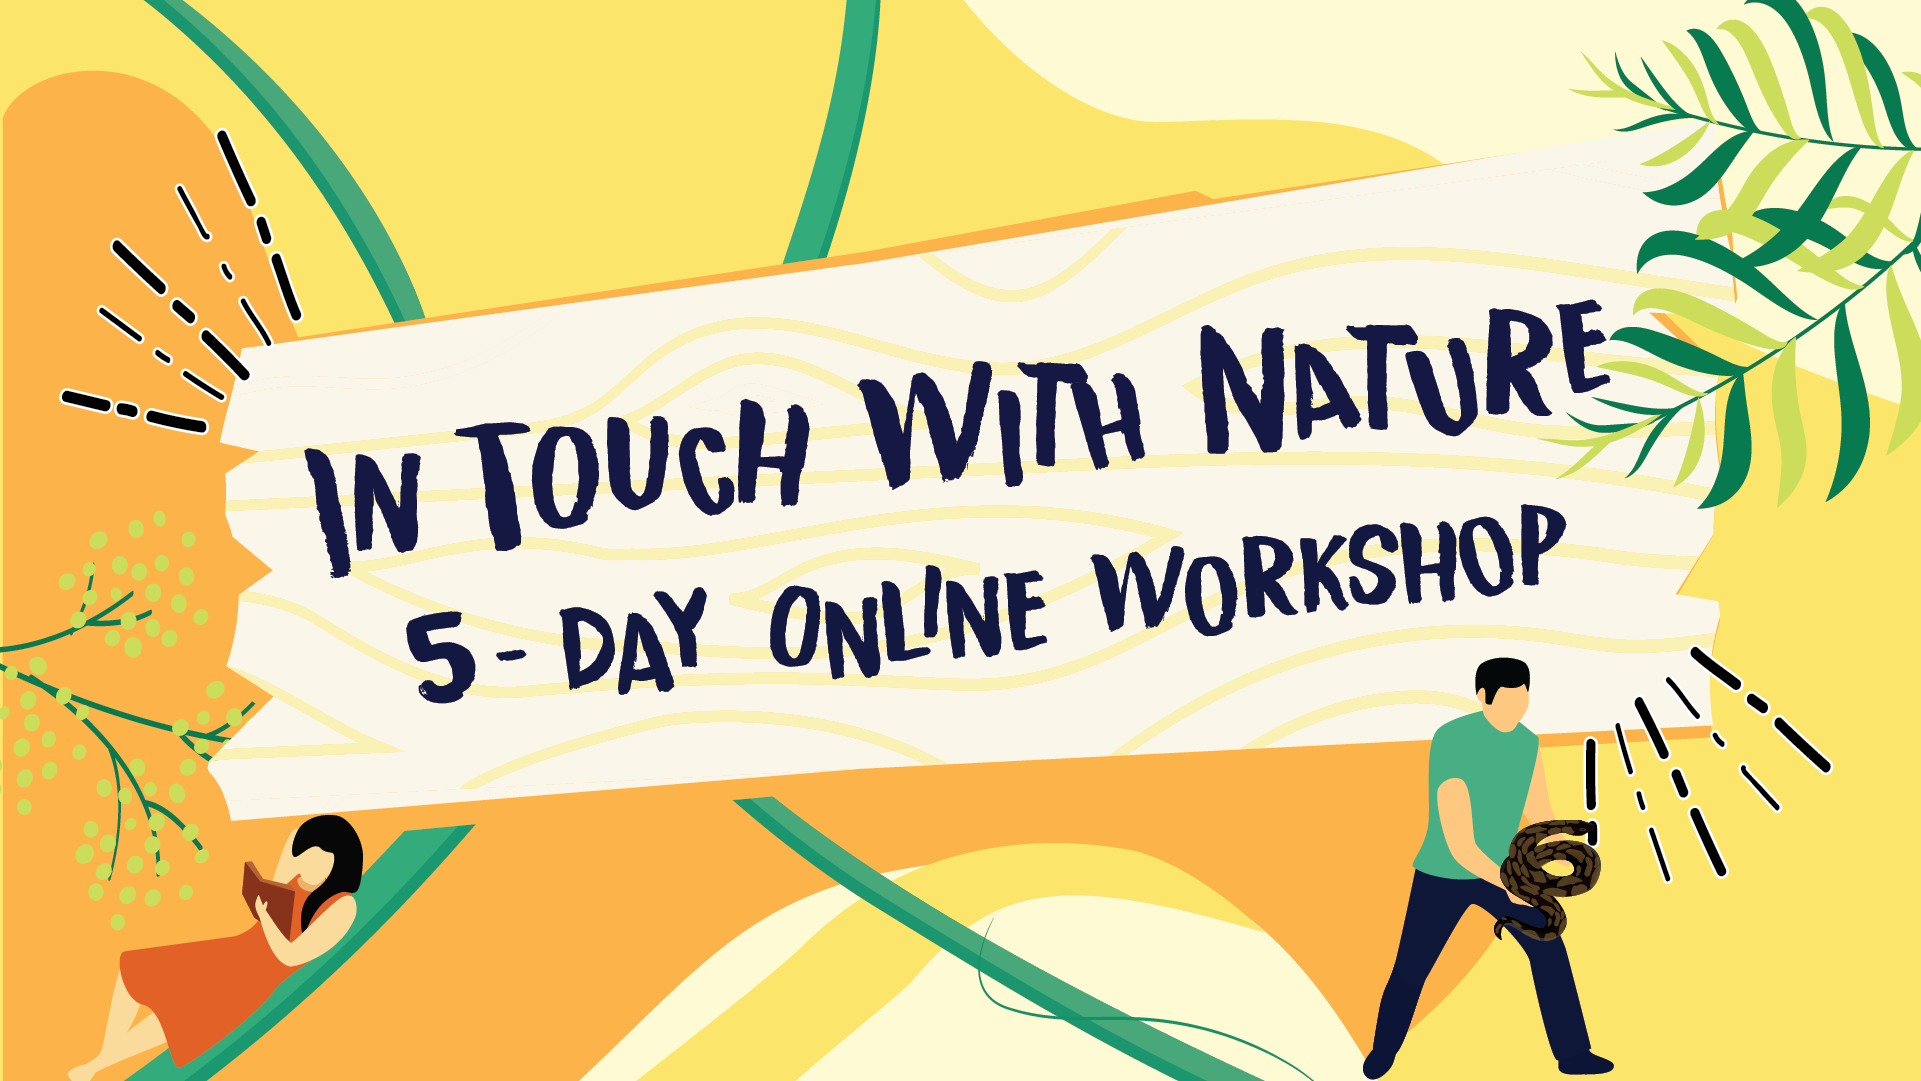 In Touch with Nature 5-Day Online Workshop (for 6-11 years old children)